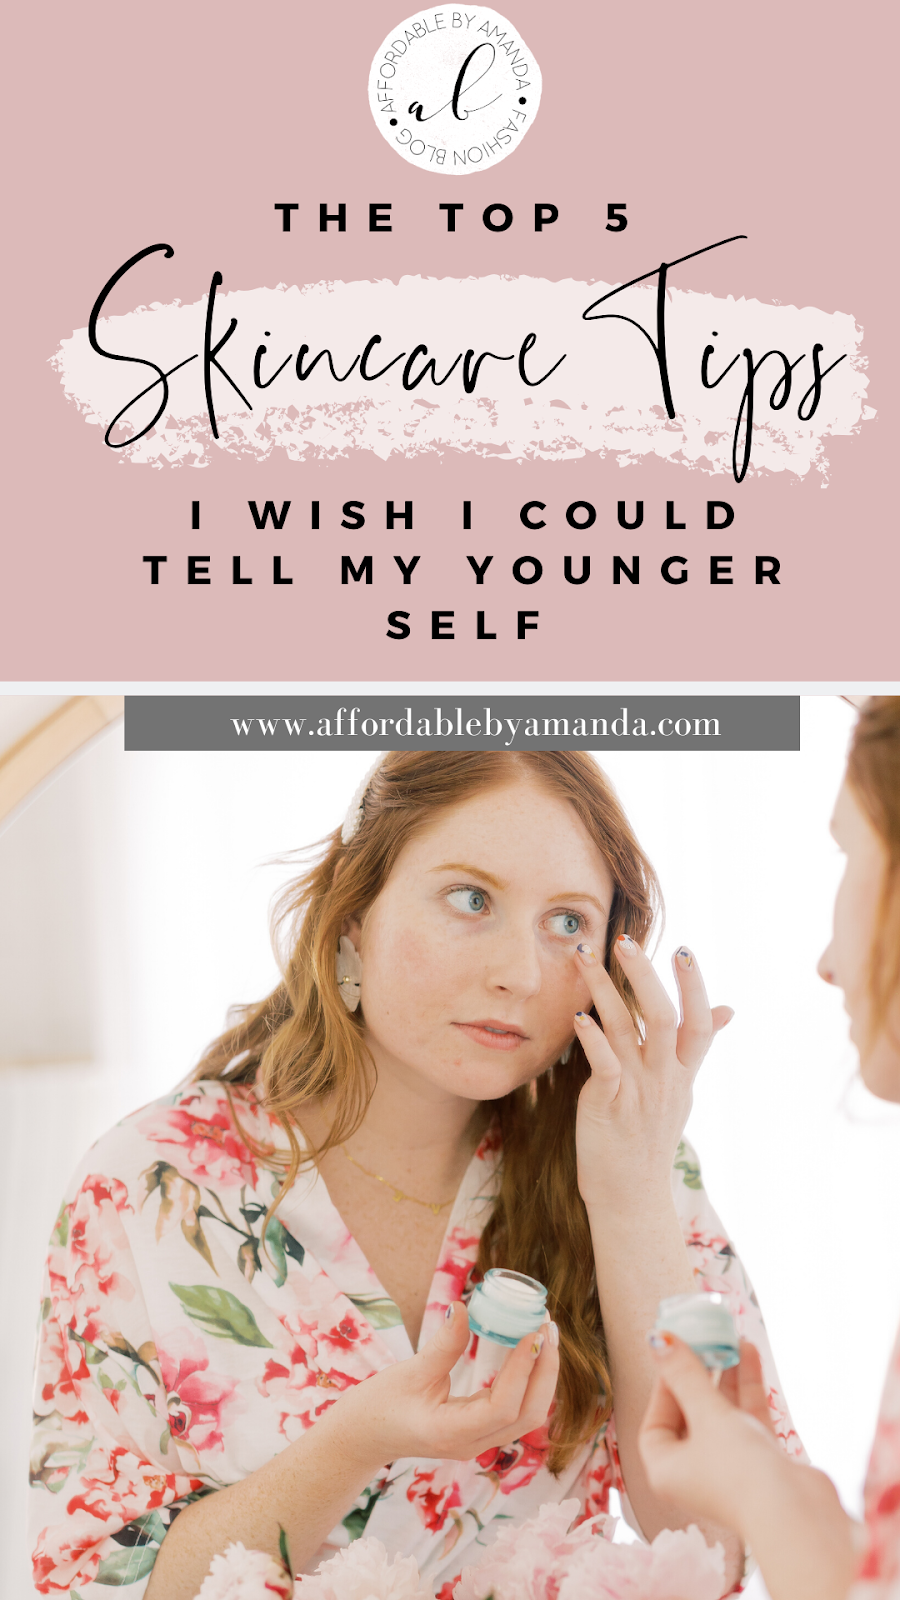 The Top 5 Skincare Tips I Wish I Could Tell My Younger Self.